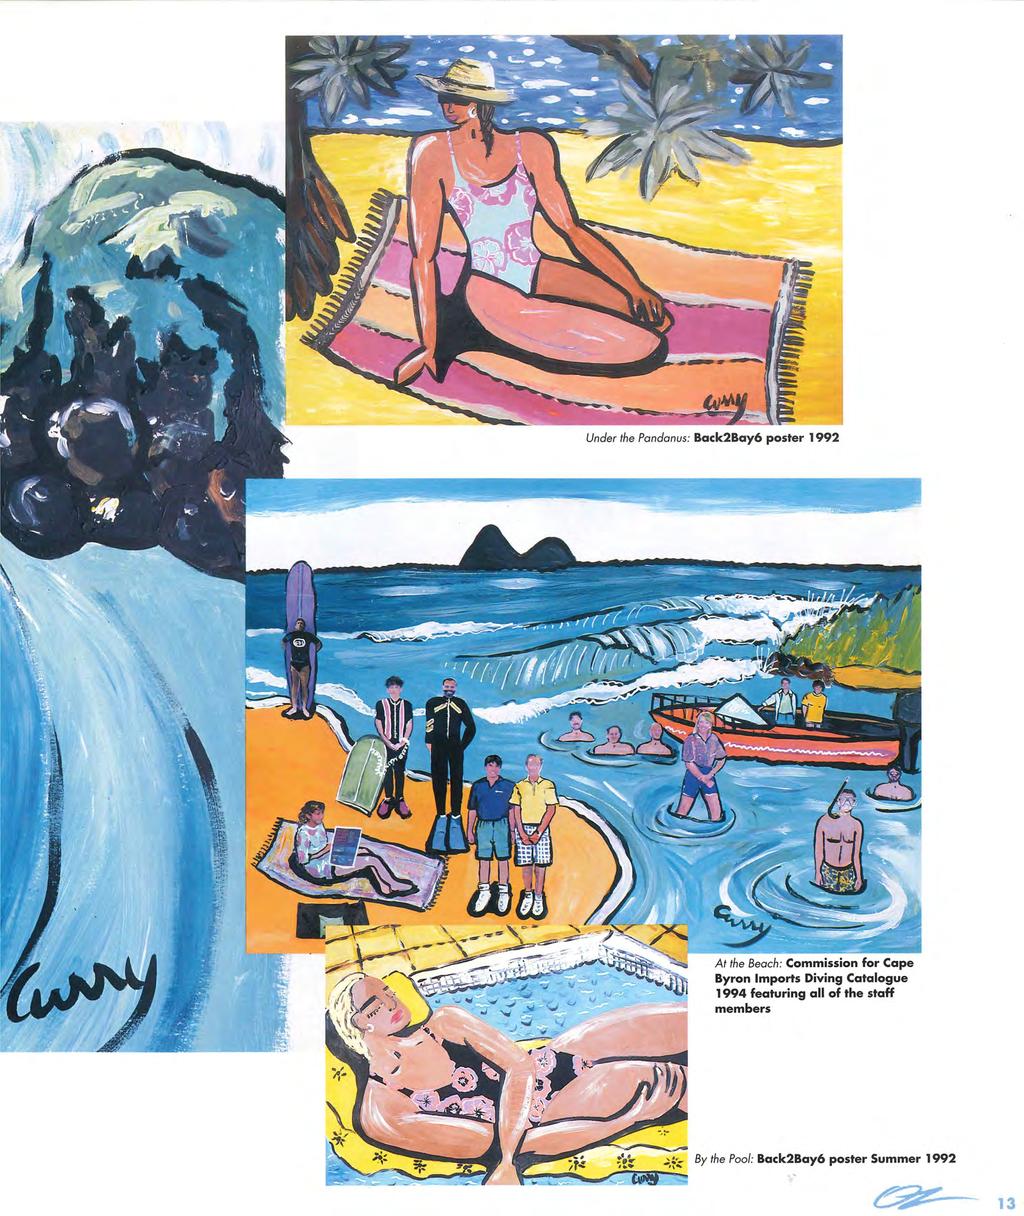 At the Beach: Commission for Cape Byron Imports Diving Catalogue 1994